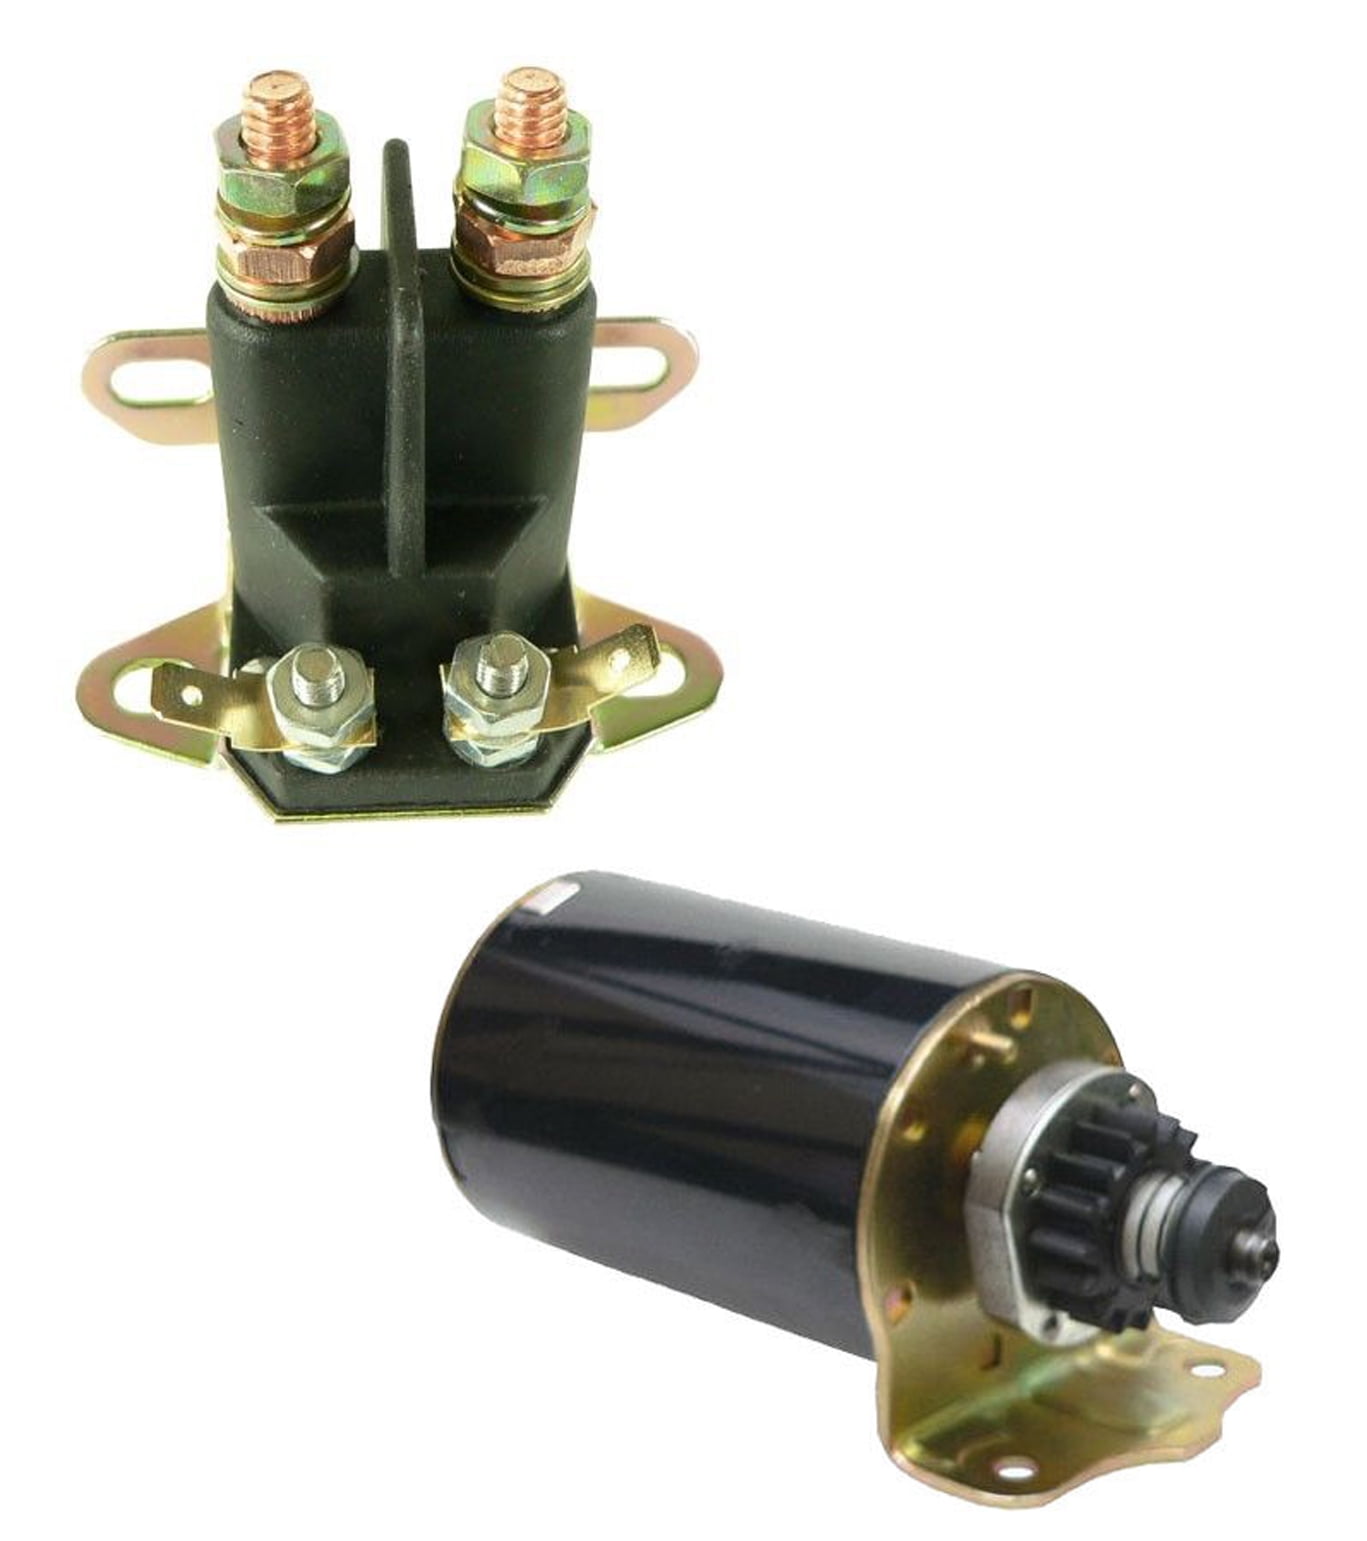 New Starter Solenoid Kit for fits Briggs & Stratton 399928 498148 495100 